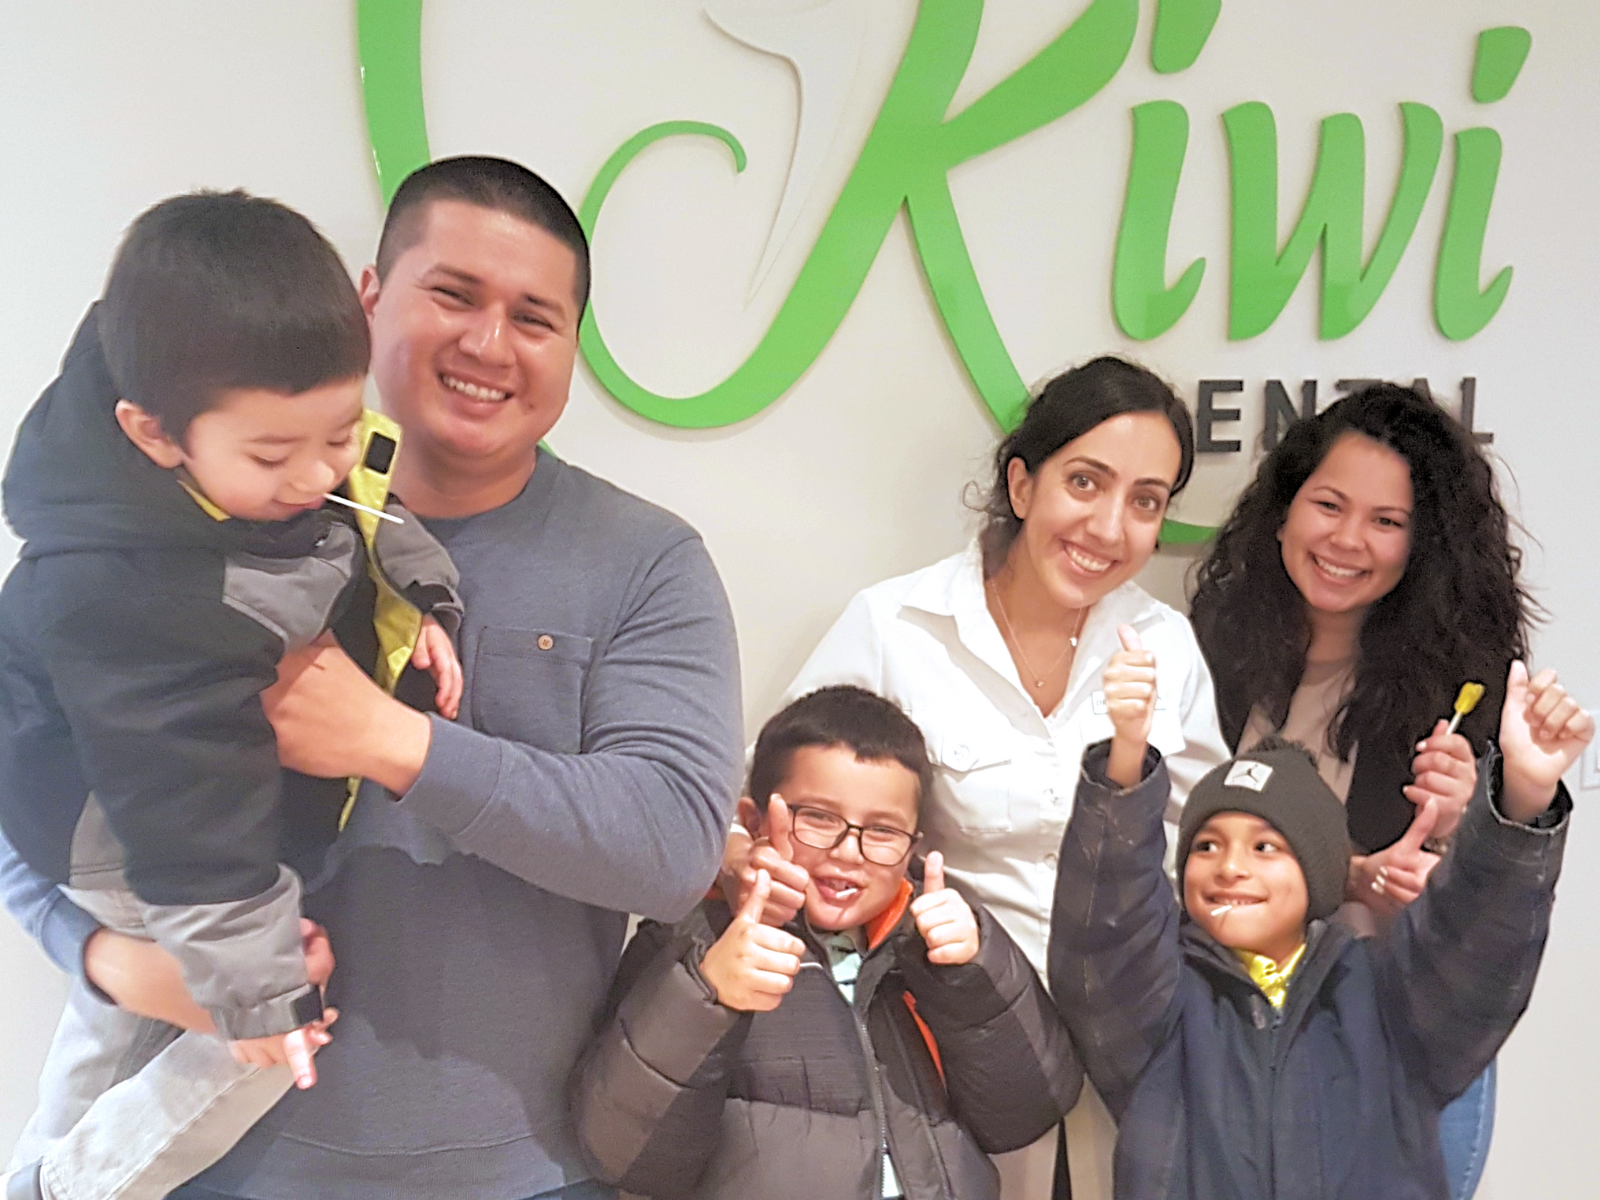 Dr Nourian with a family at Kiwi Dental Office